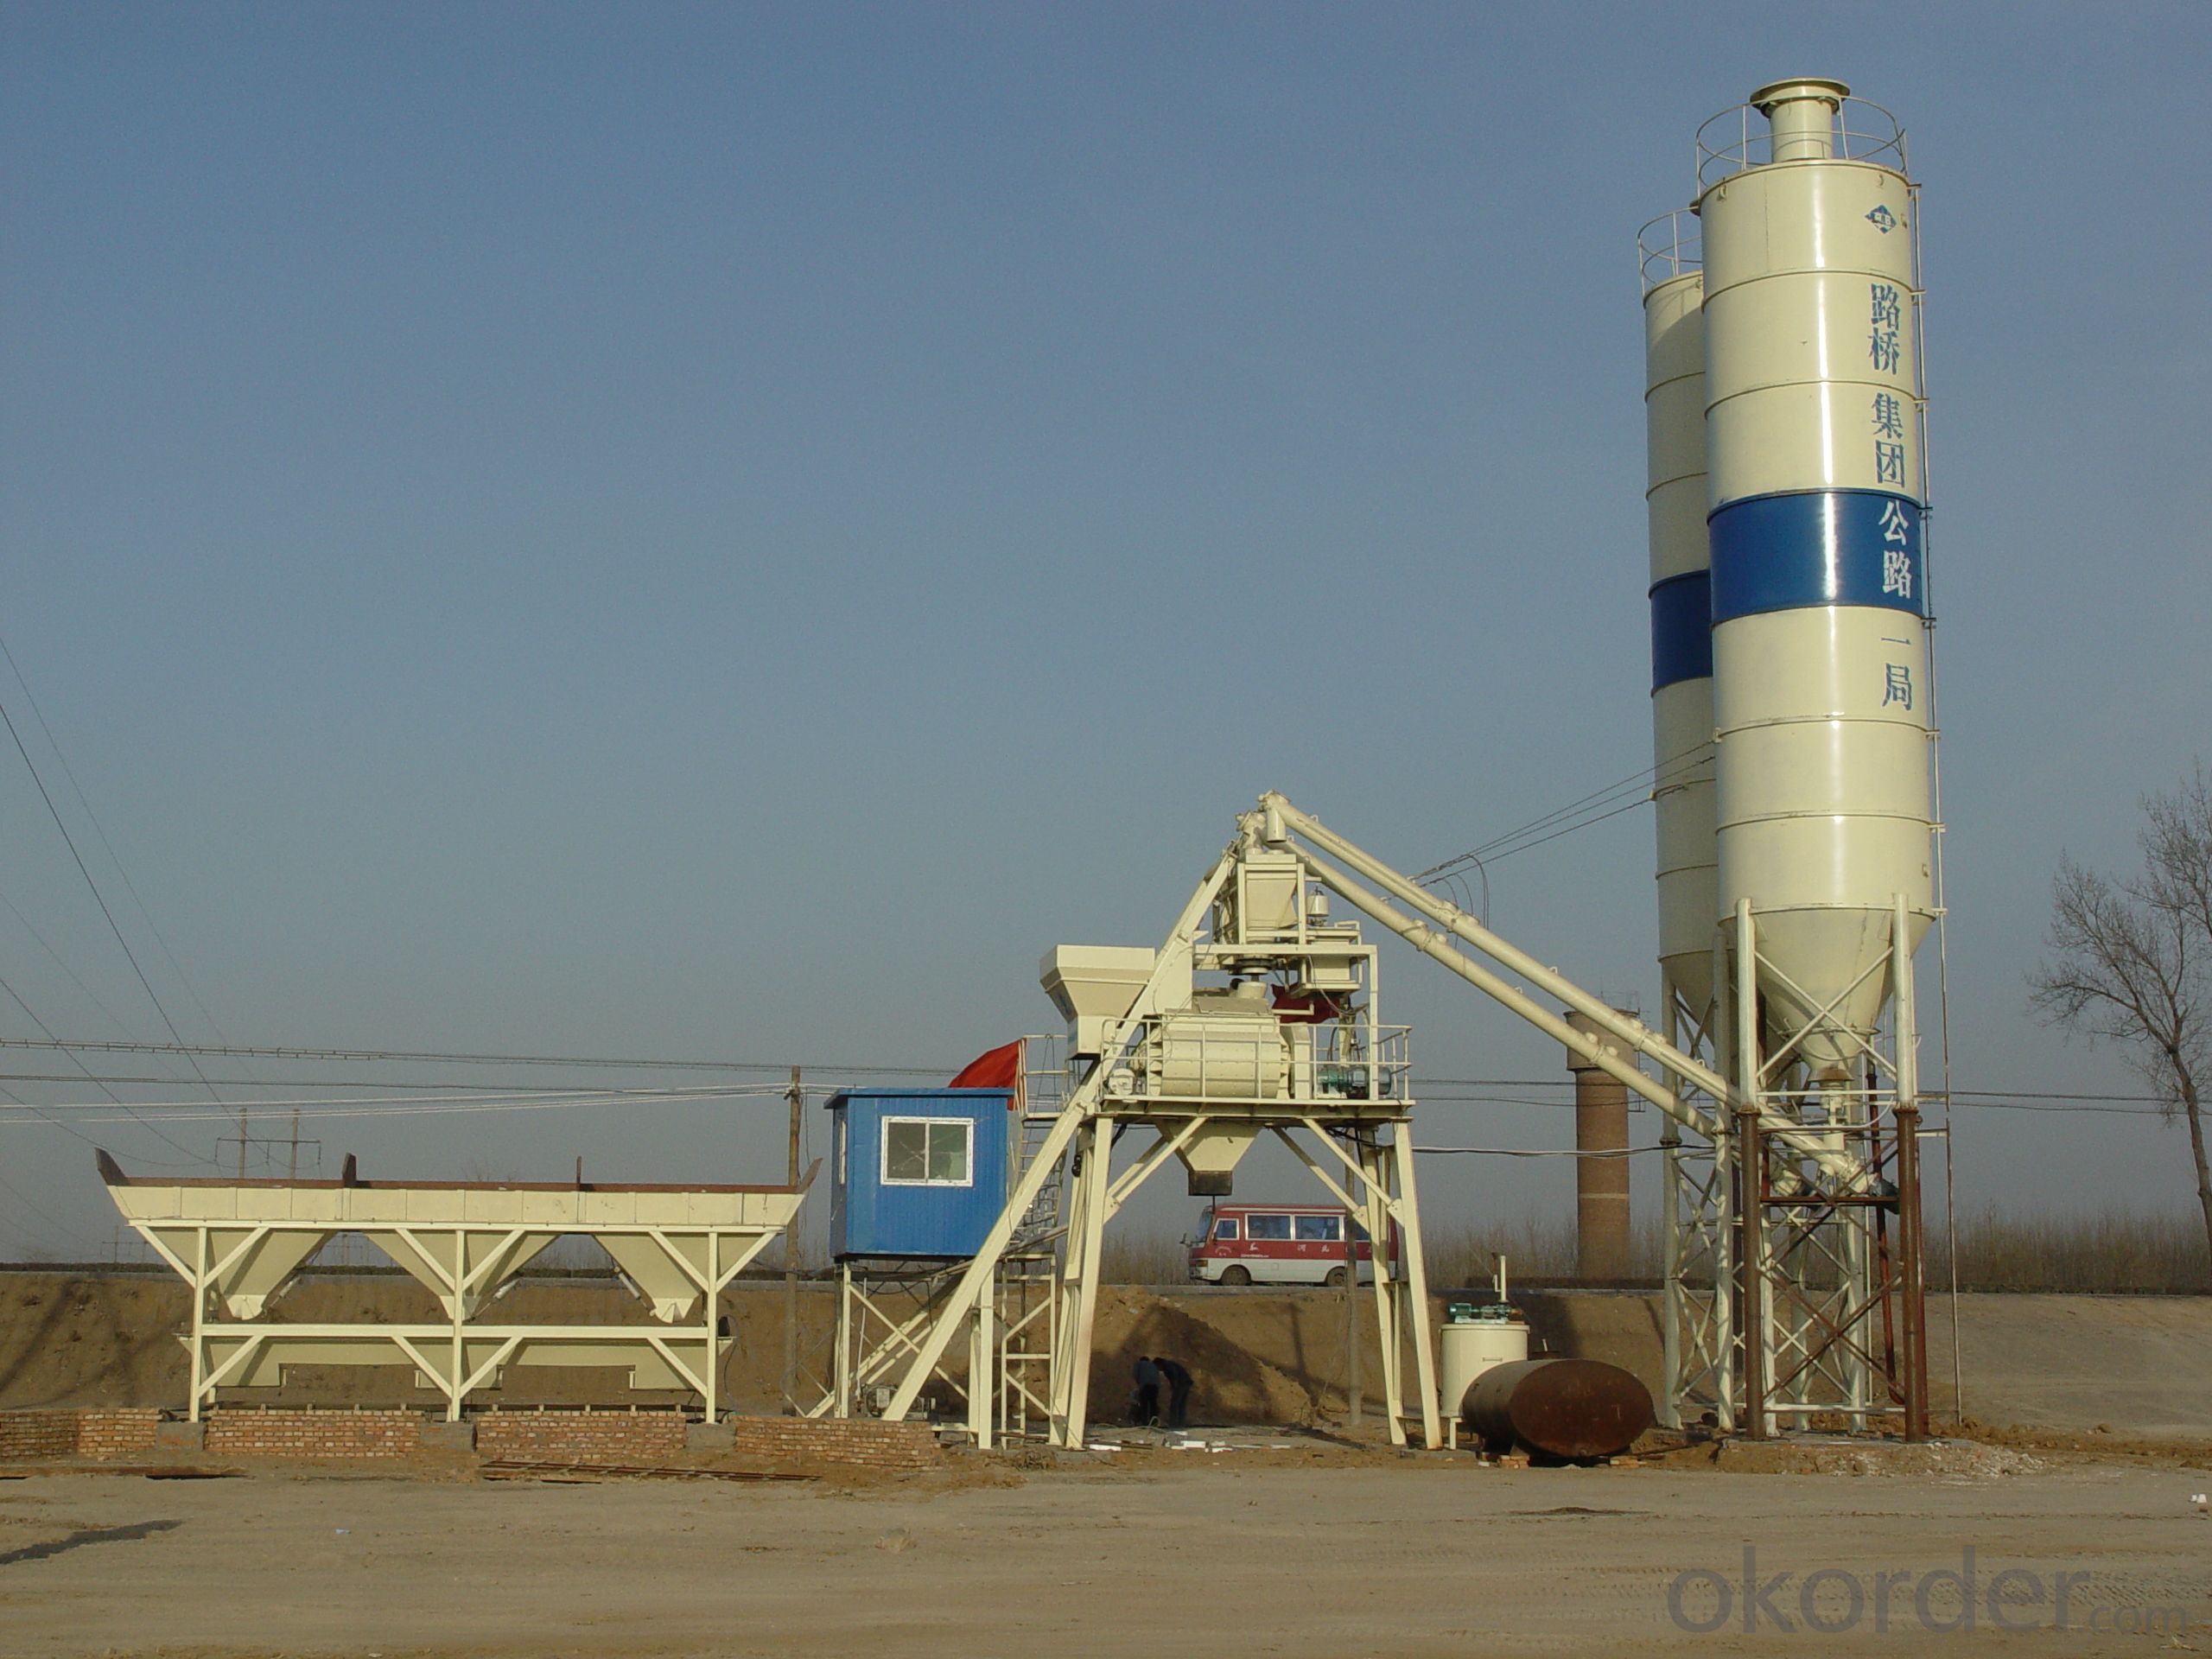 Buy HZS 75 concrete batching plant Price,Size,Weight,Model